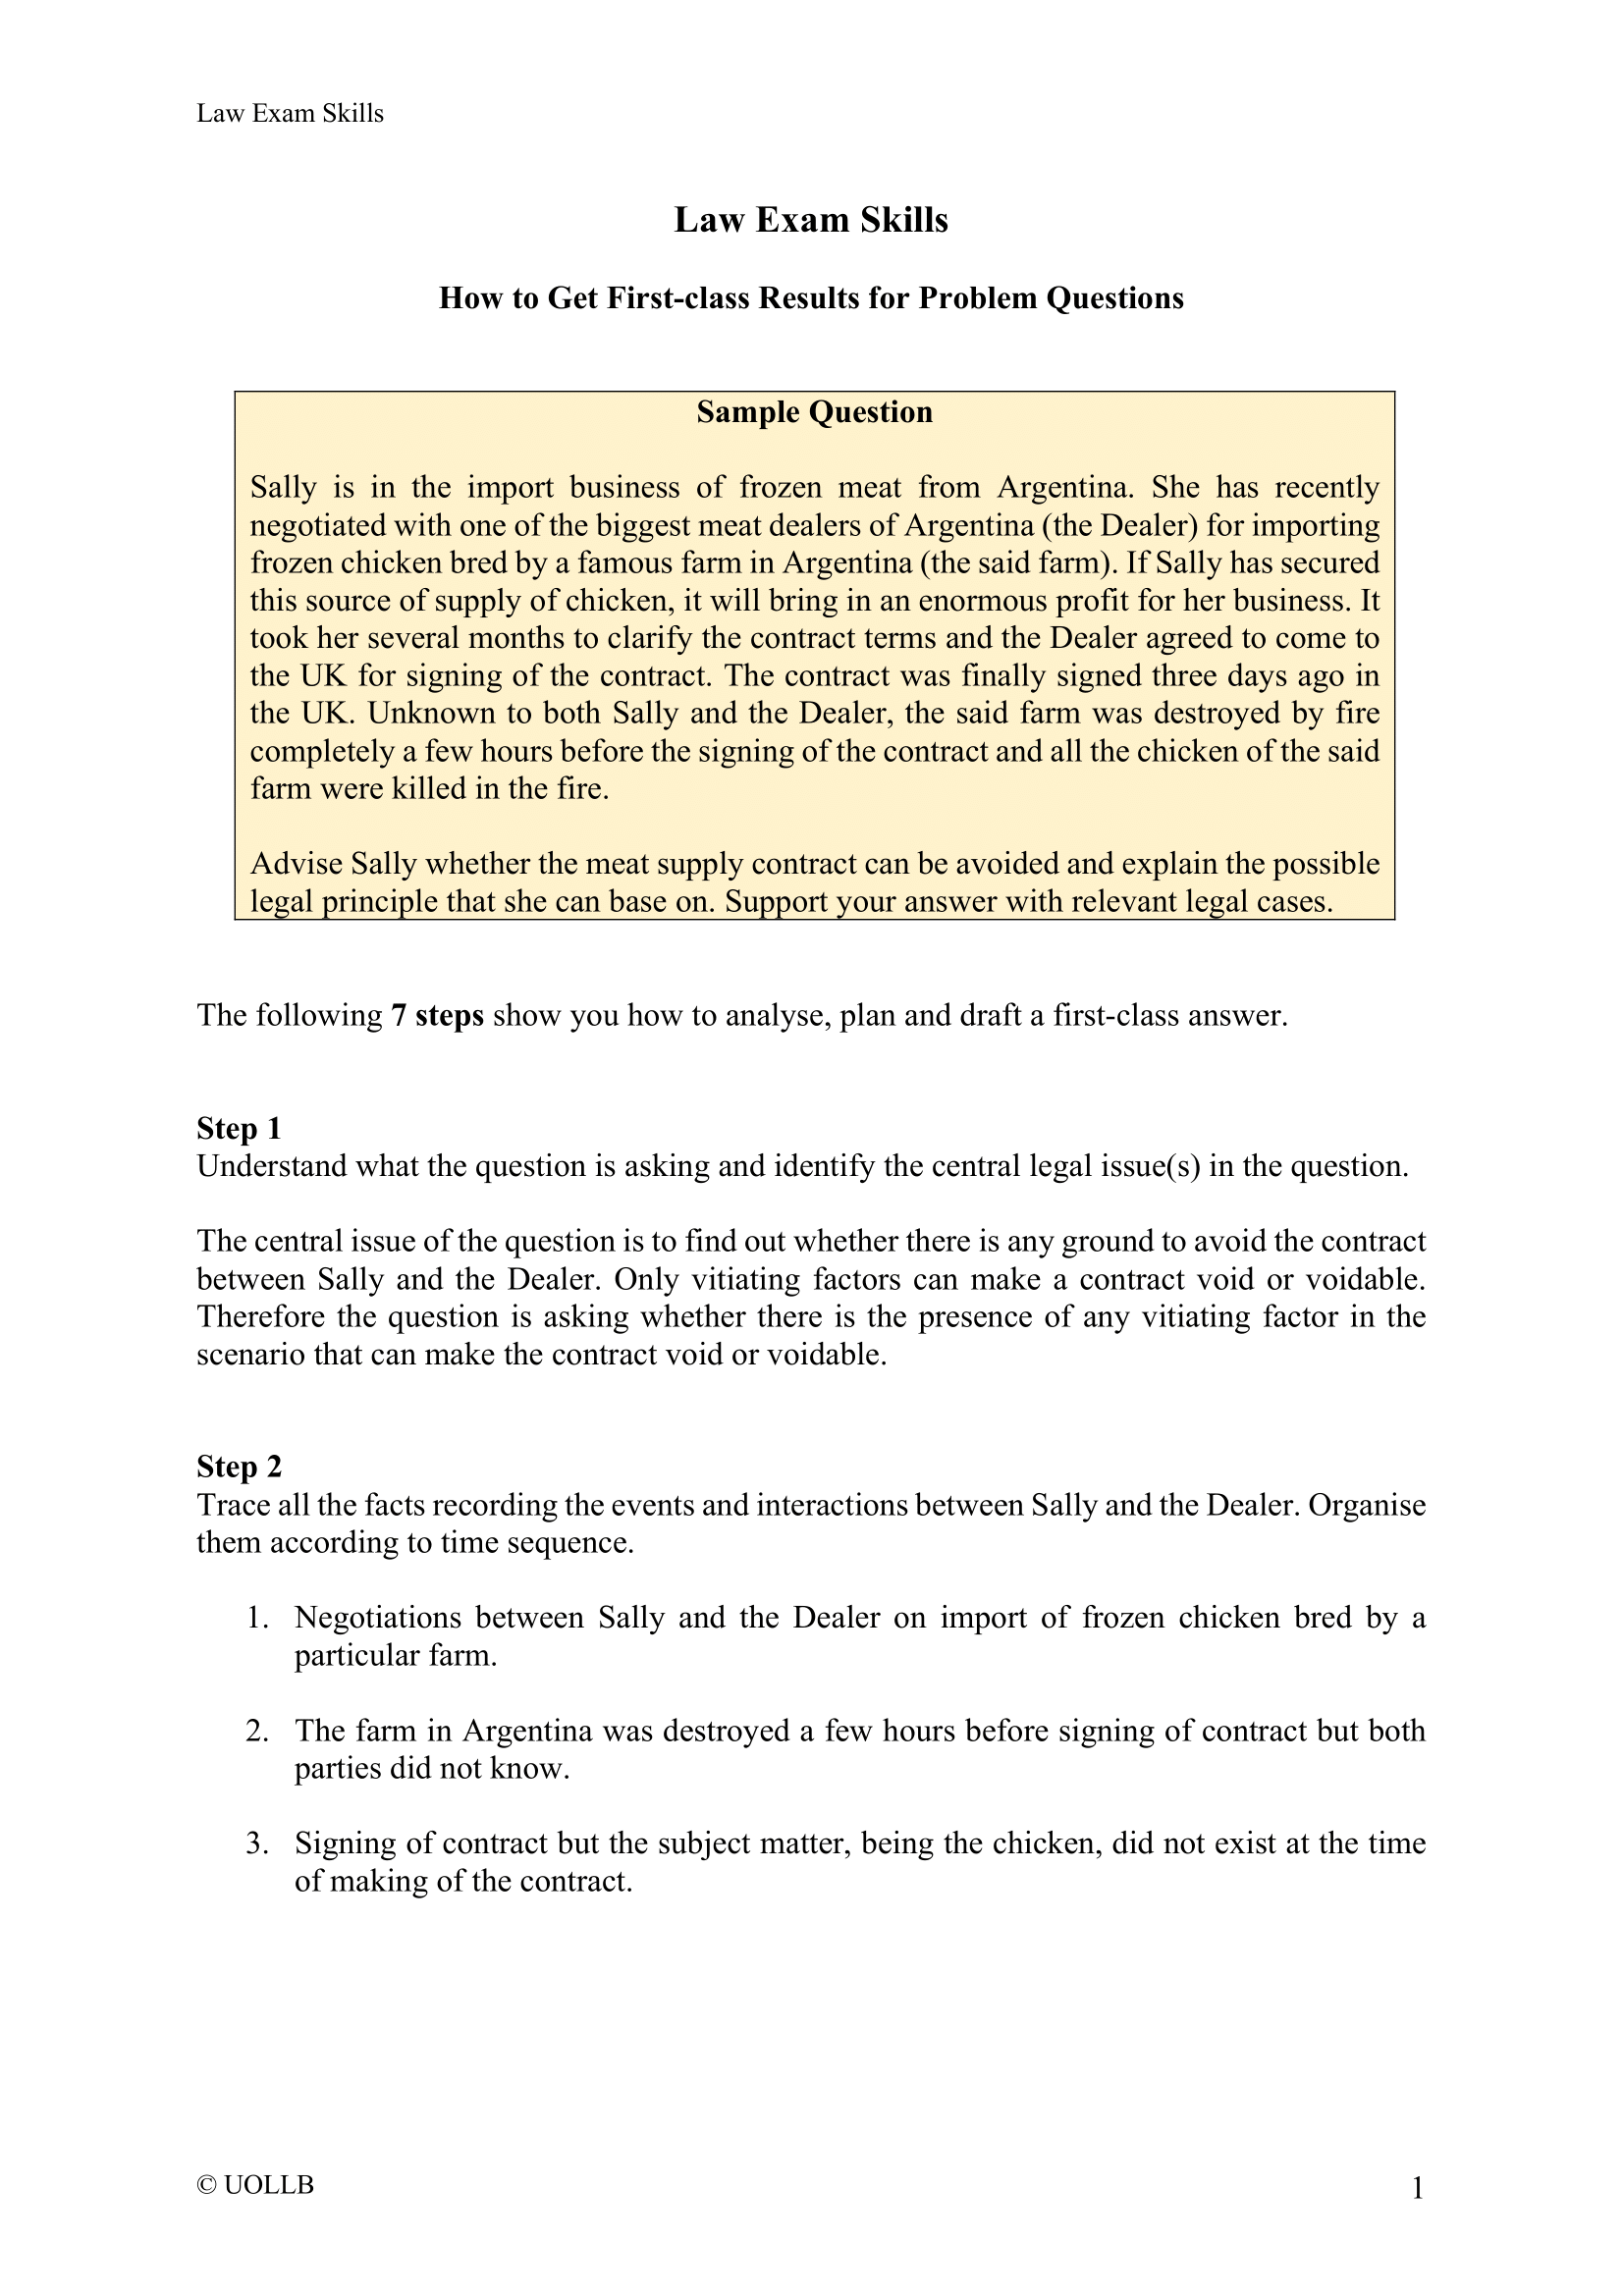 Law Exam Guide